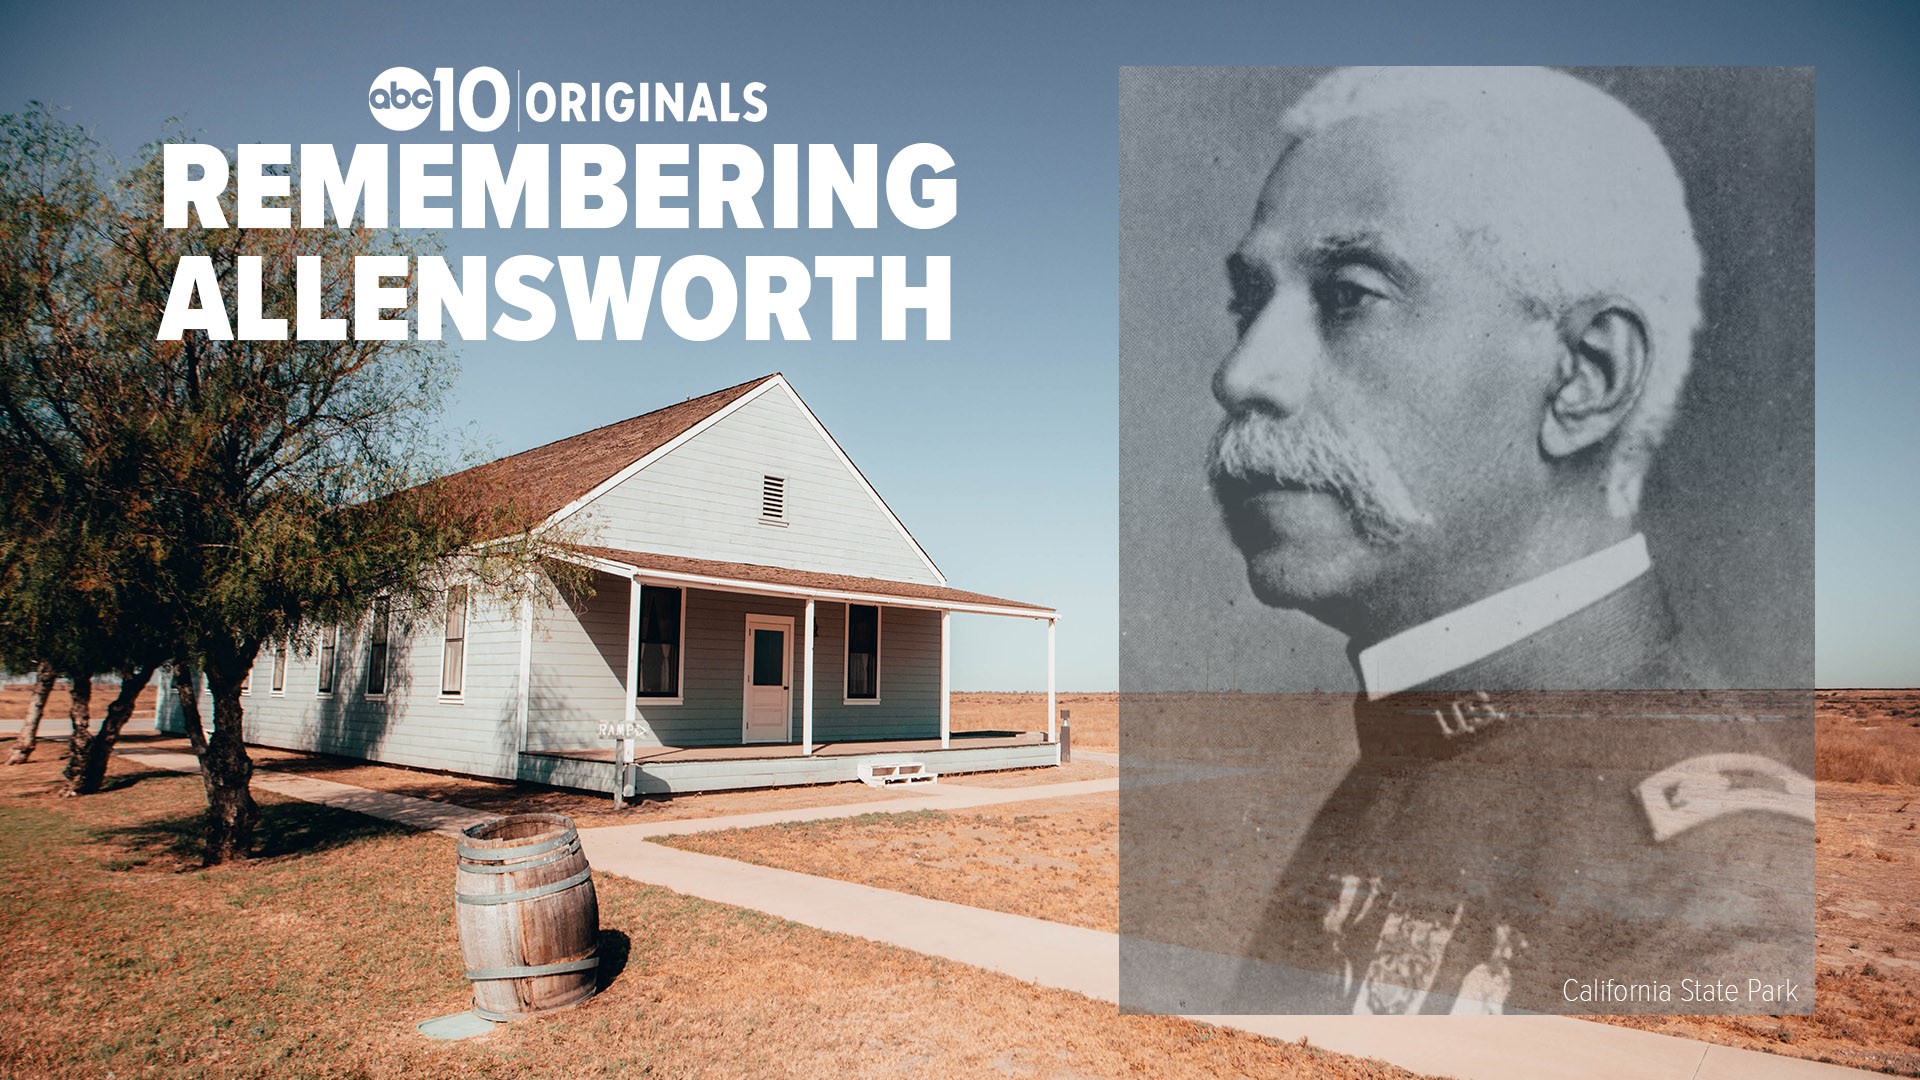 The former town of Allensworth was the only town fully financed, governed, built, designed and populated by African-Americans in California.